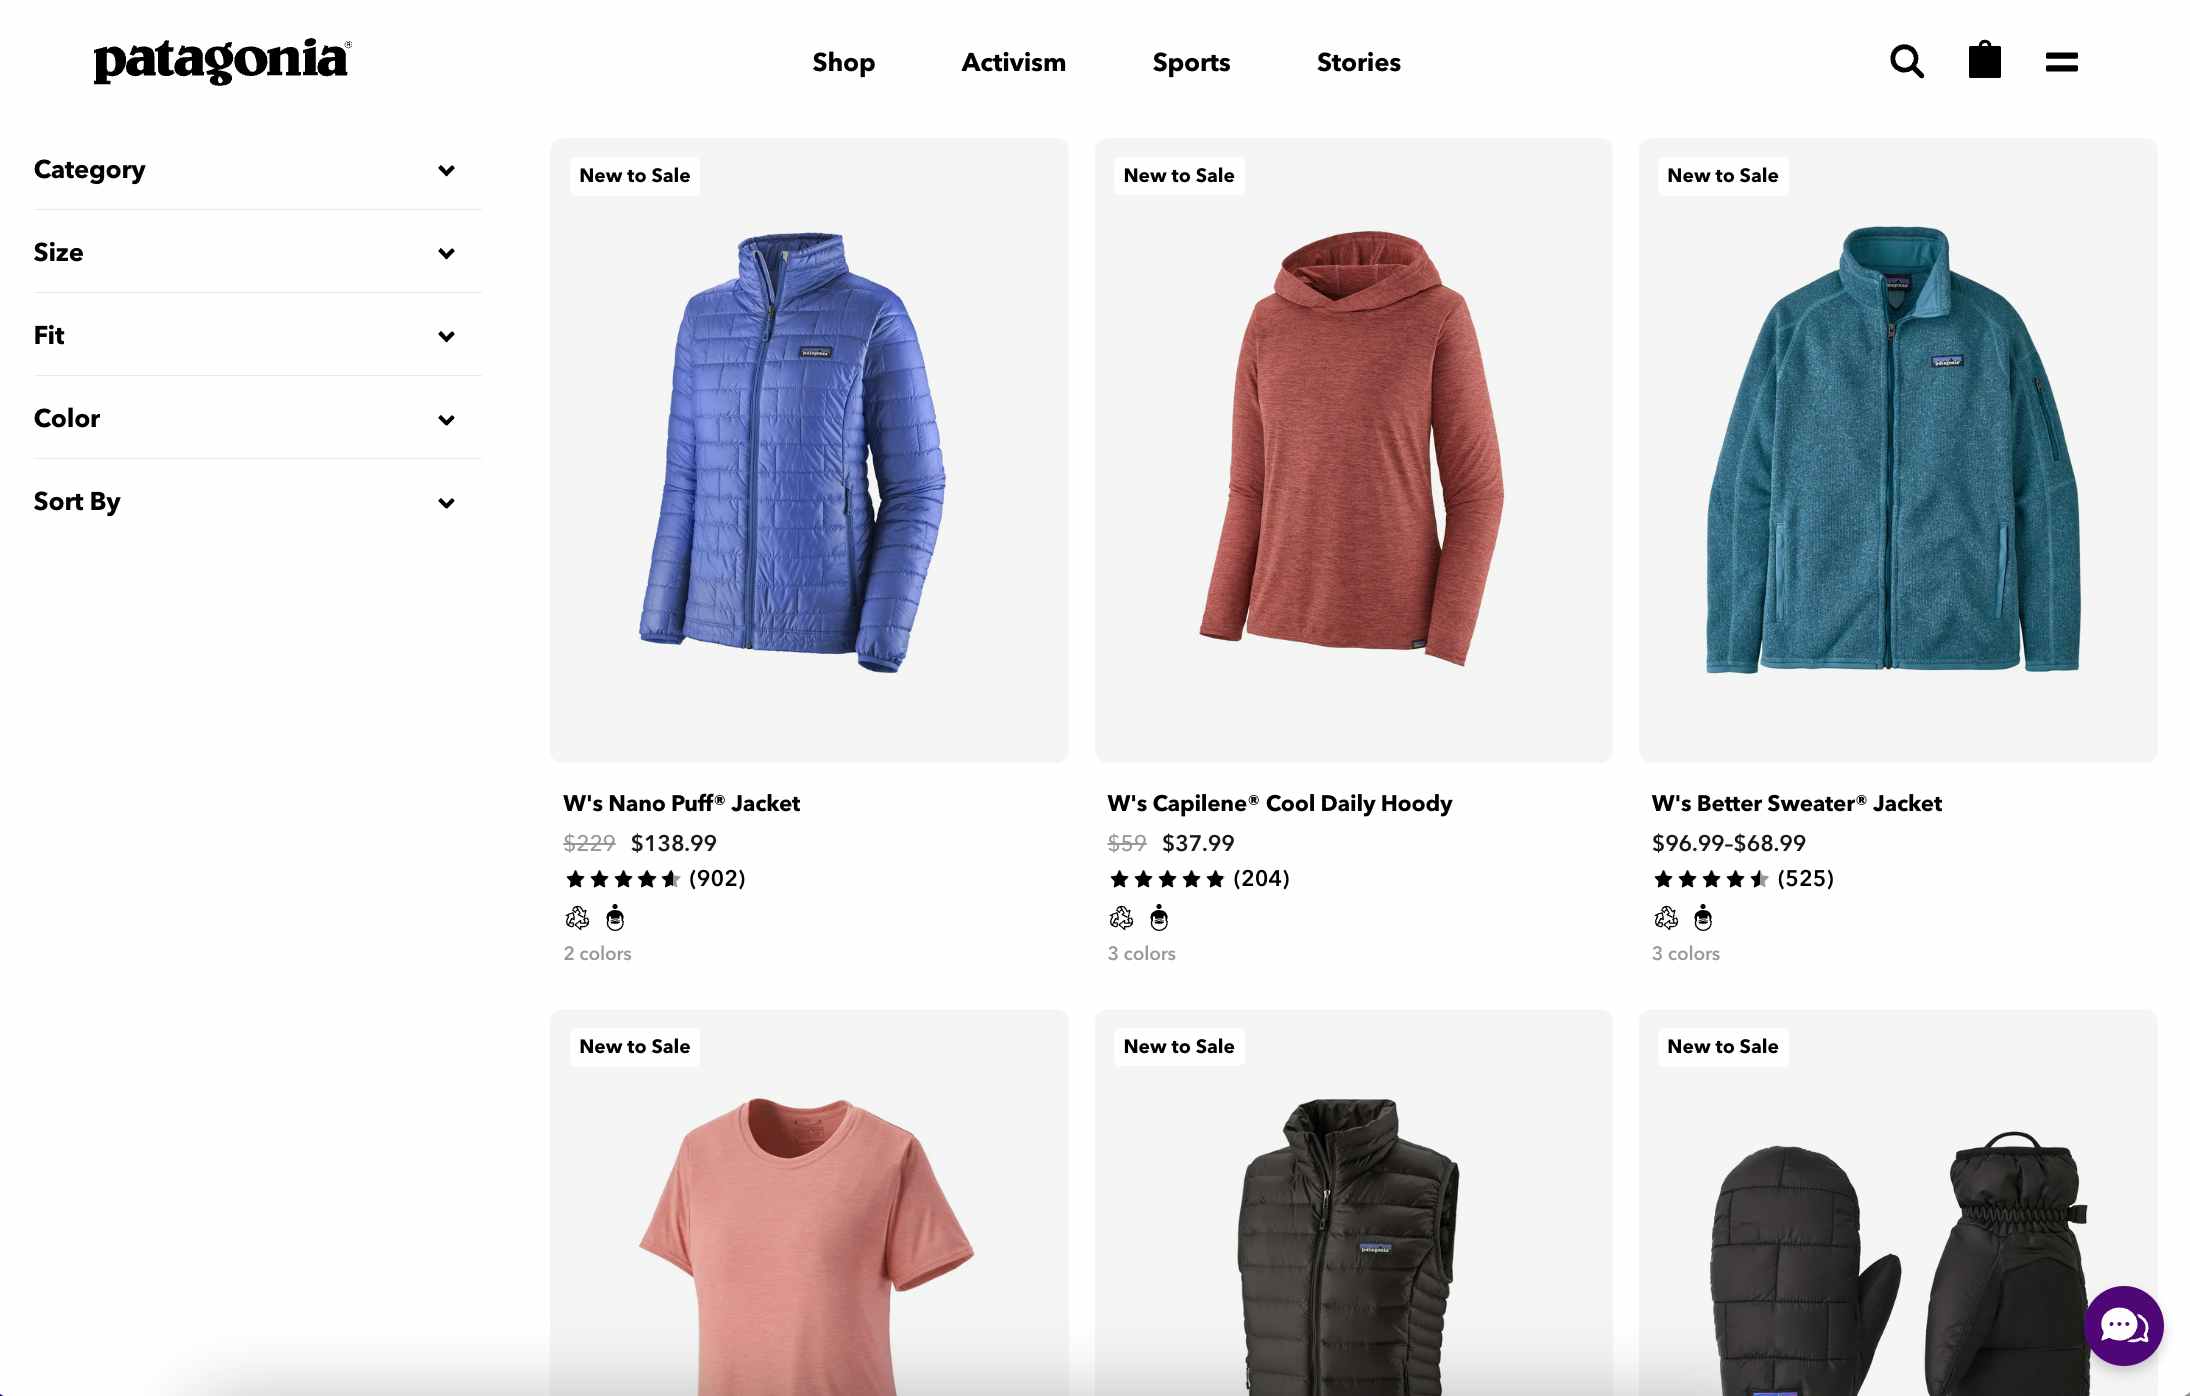 the web specials section of Patagonia's website showing discounts on jackets, sweaters, and vests